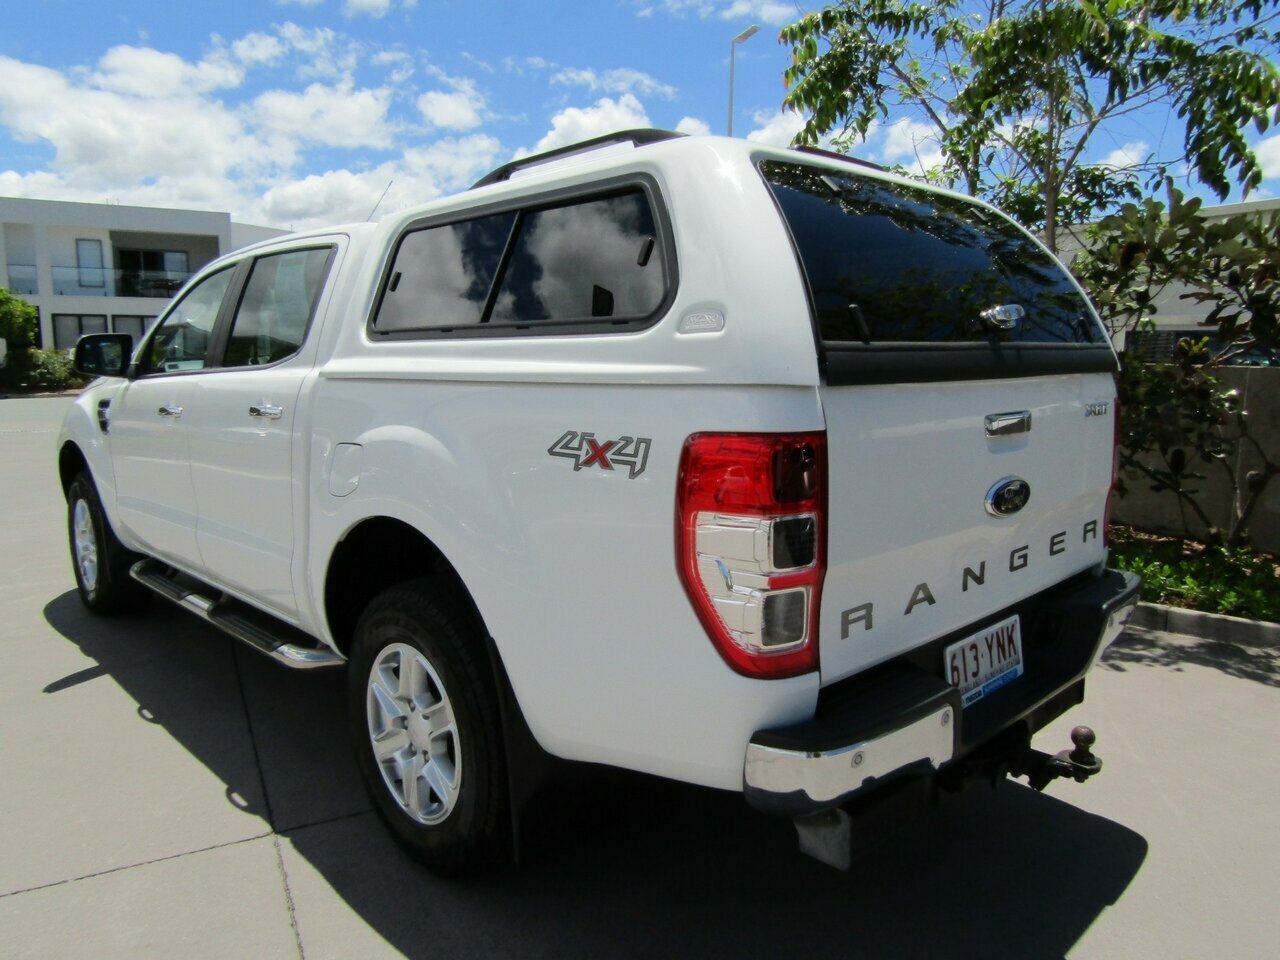 2012 Ford Ranger PX XLT Double Cab Ute Image 5